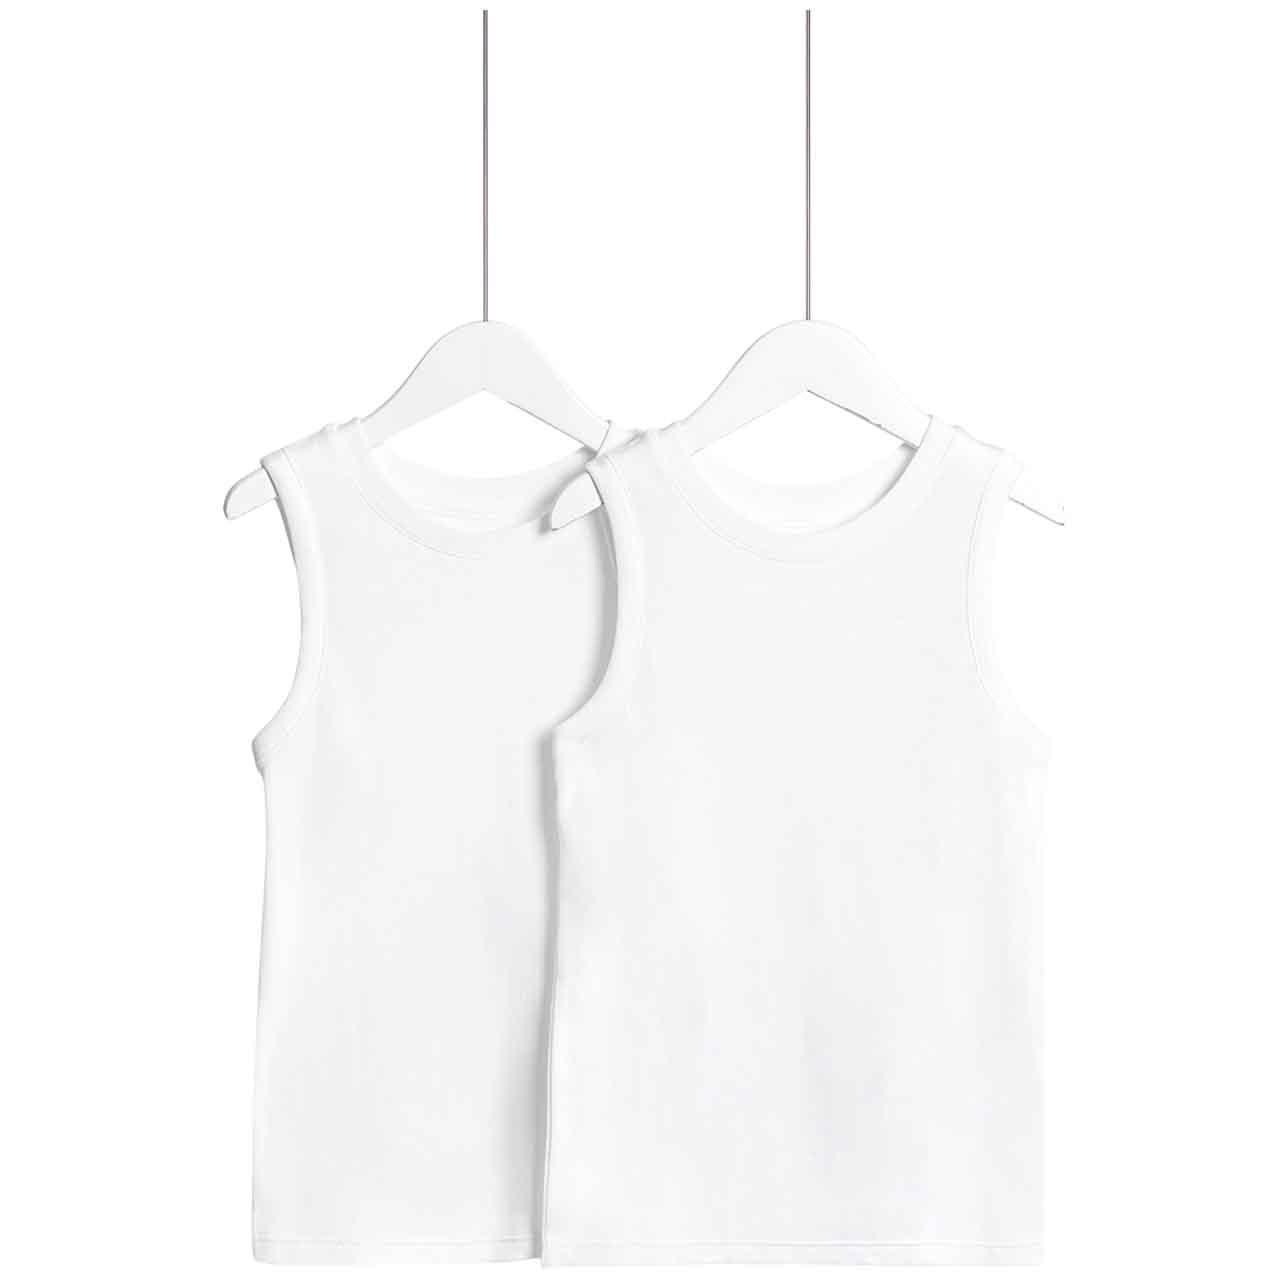 M&S Thermal Vest, 3-4 Years, White, 2 Pack 